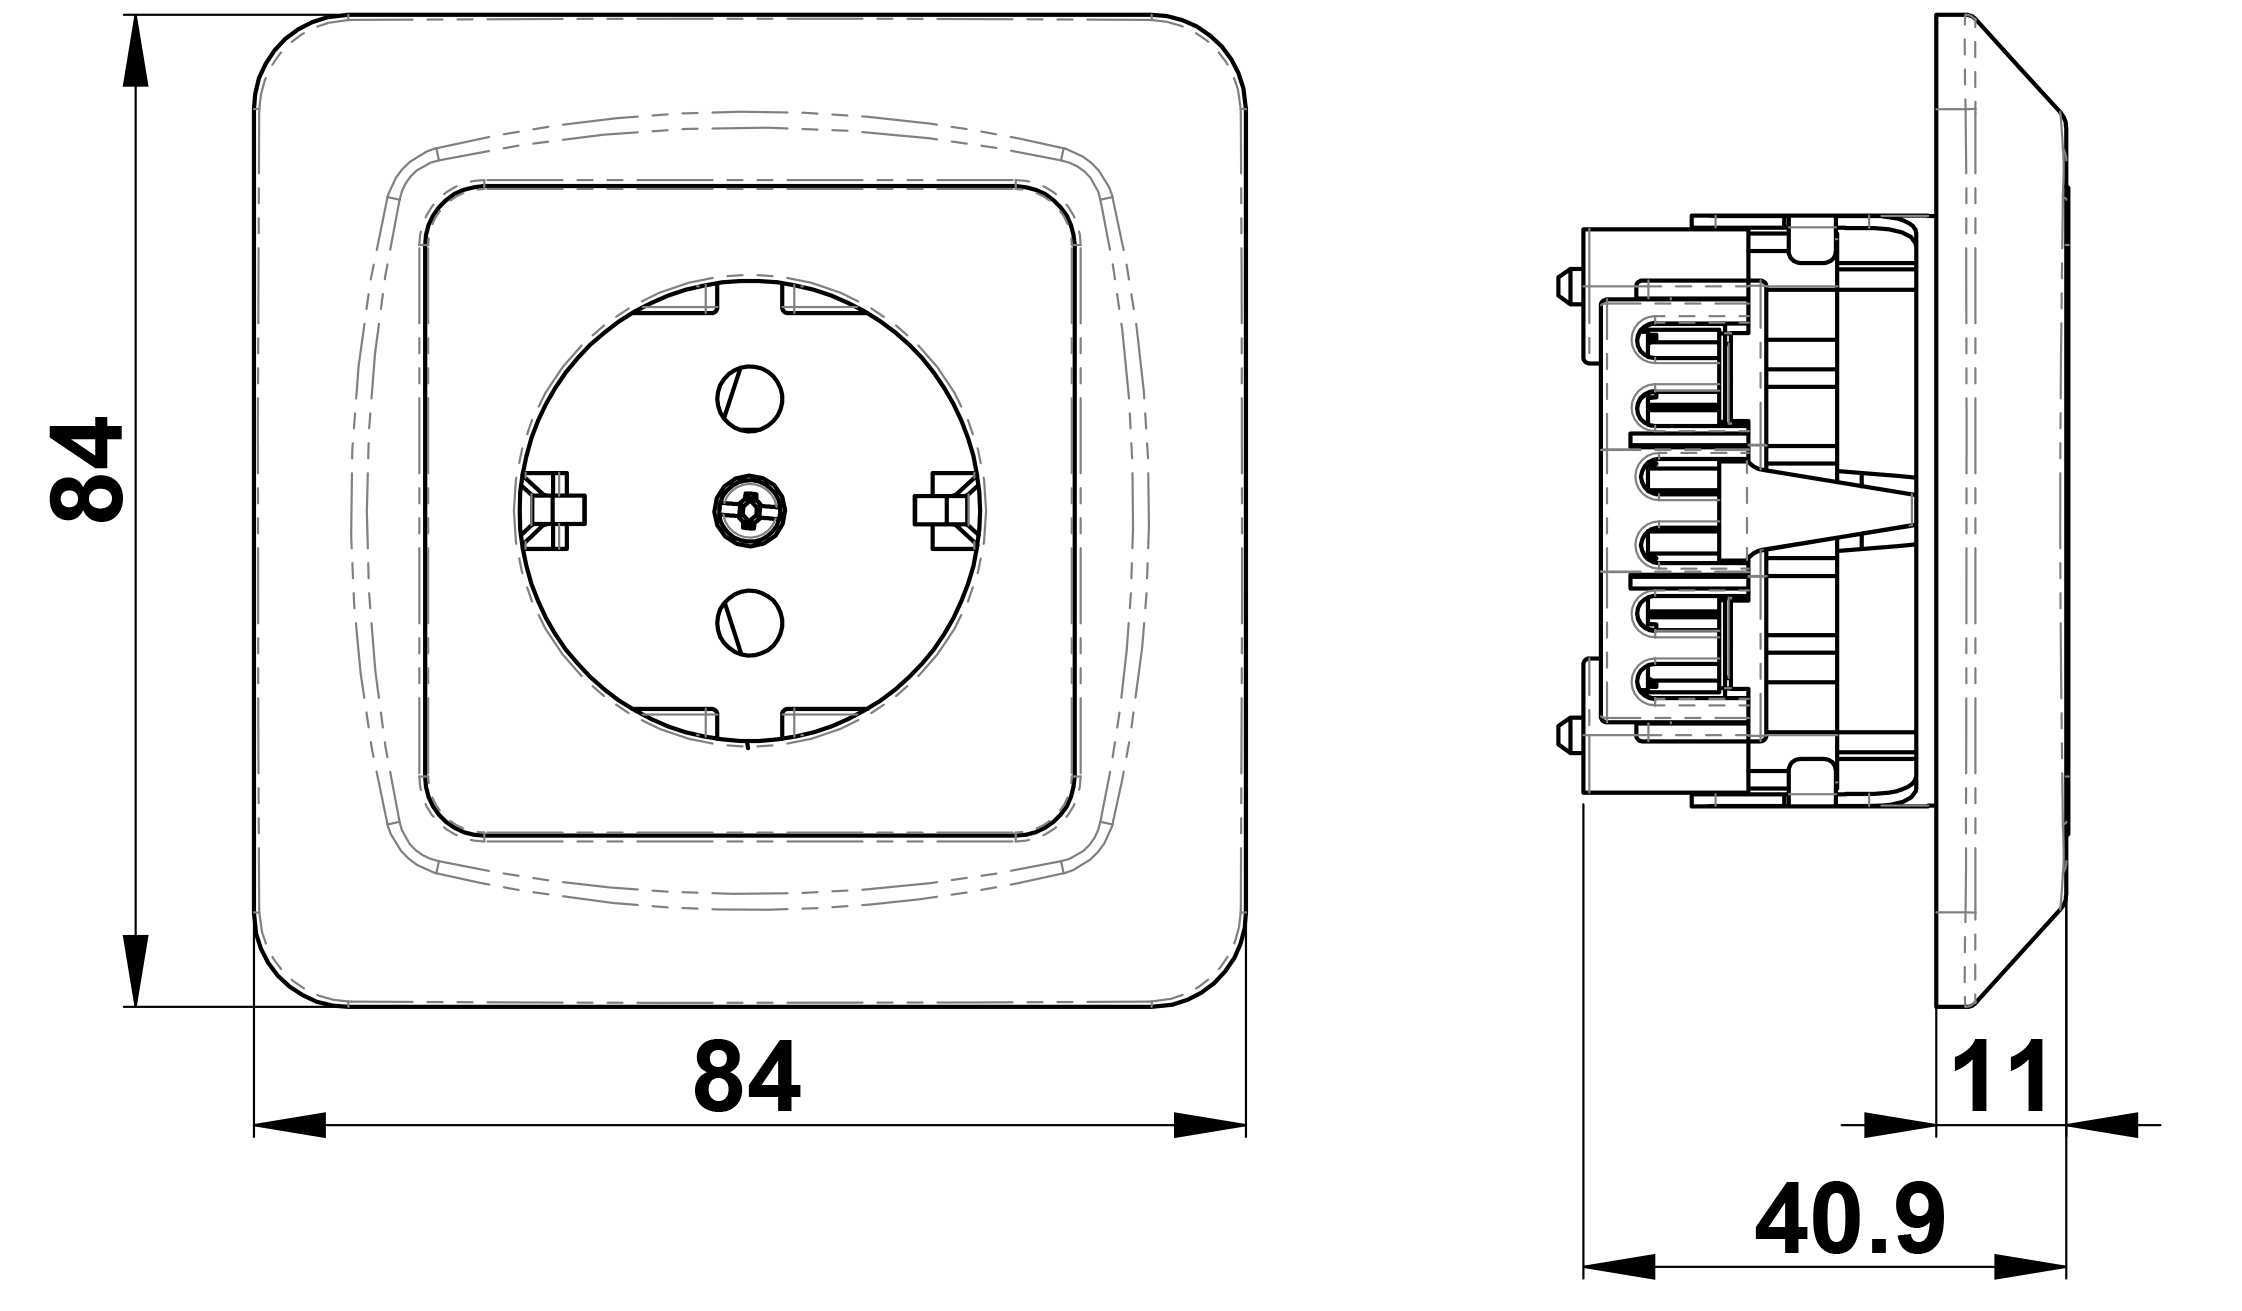 Flush-type wall socket outlet for fixed installation